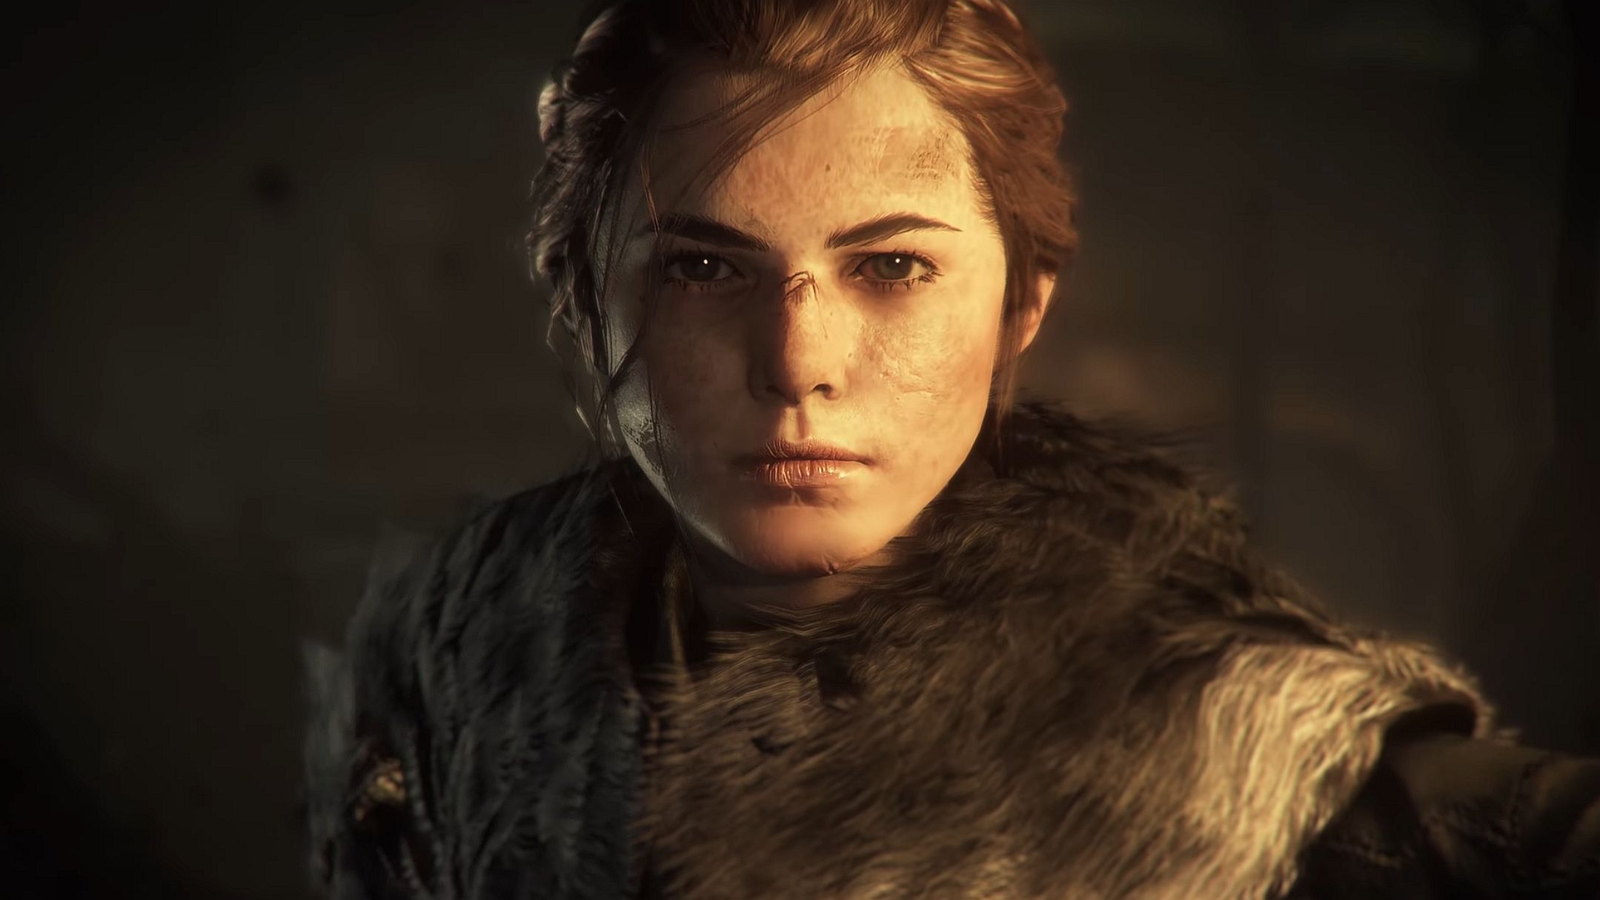 A Plague Tale: Innocence is being optimised for Xbox Series X/S